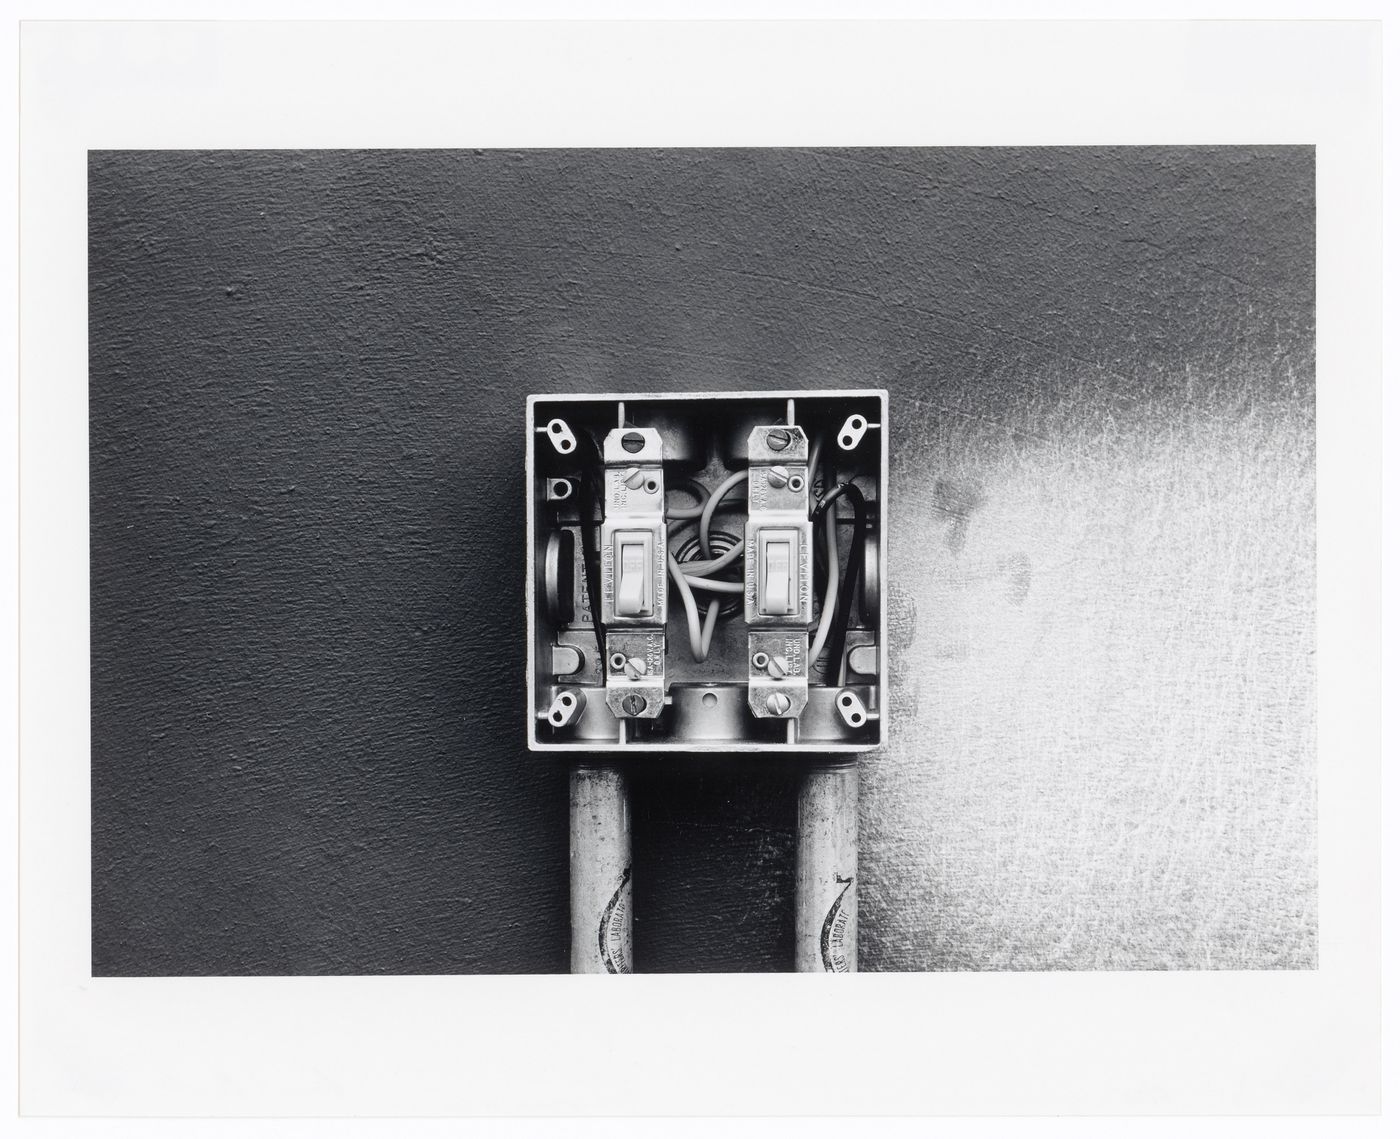 Detail view of an open electrical switch on the south wall of United American Van and Storage, 2481 Alton, Irvine, California, United States, from the series “The new Industrial Parks near Irvine, California”